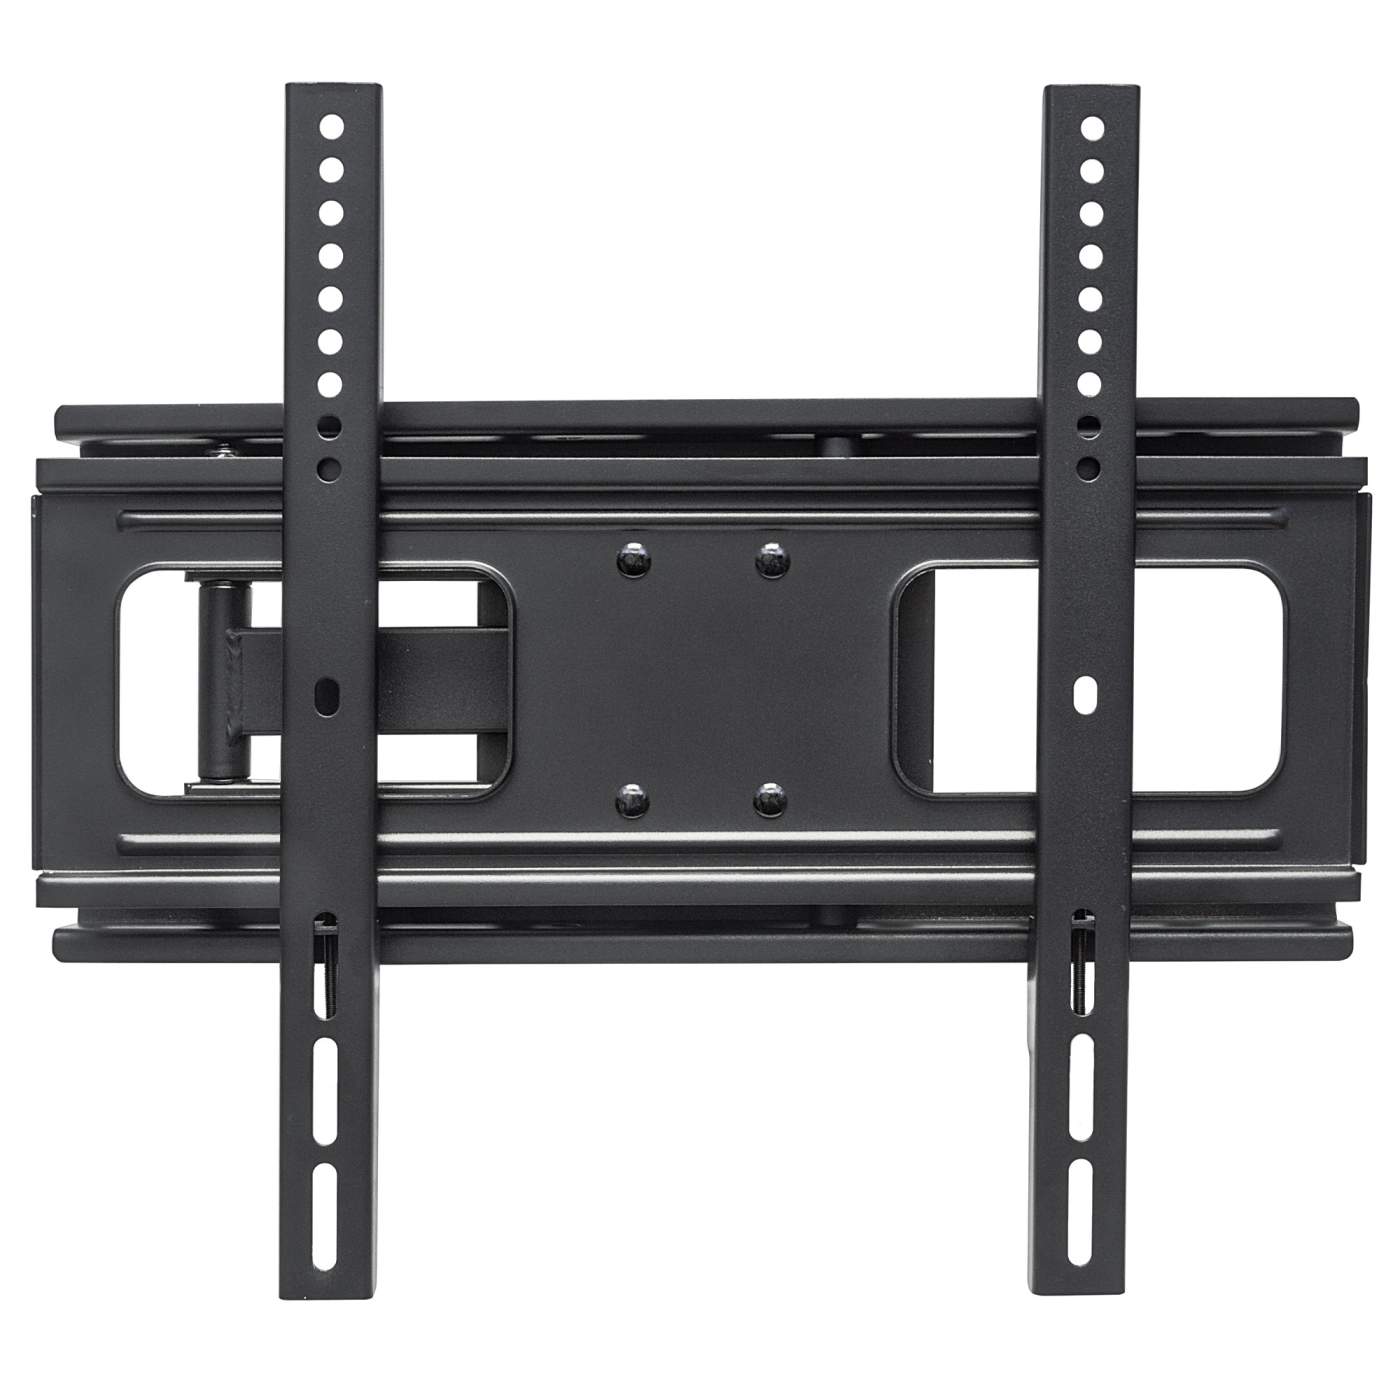 Manhattan TV and Monitor Wall Mount - 32 Inches-55 Inches - VESA Compatible